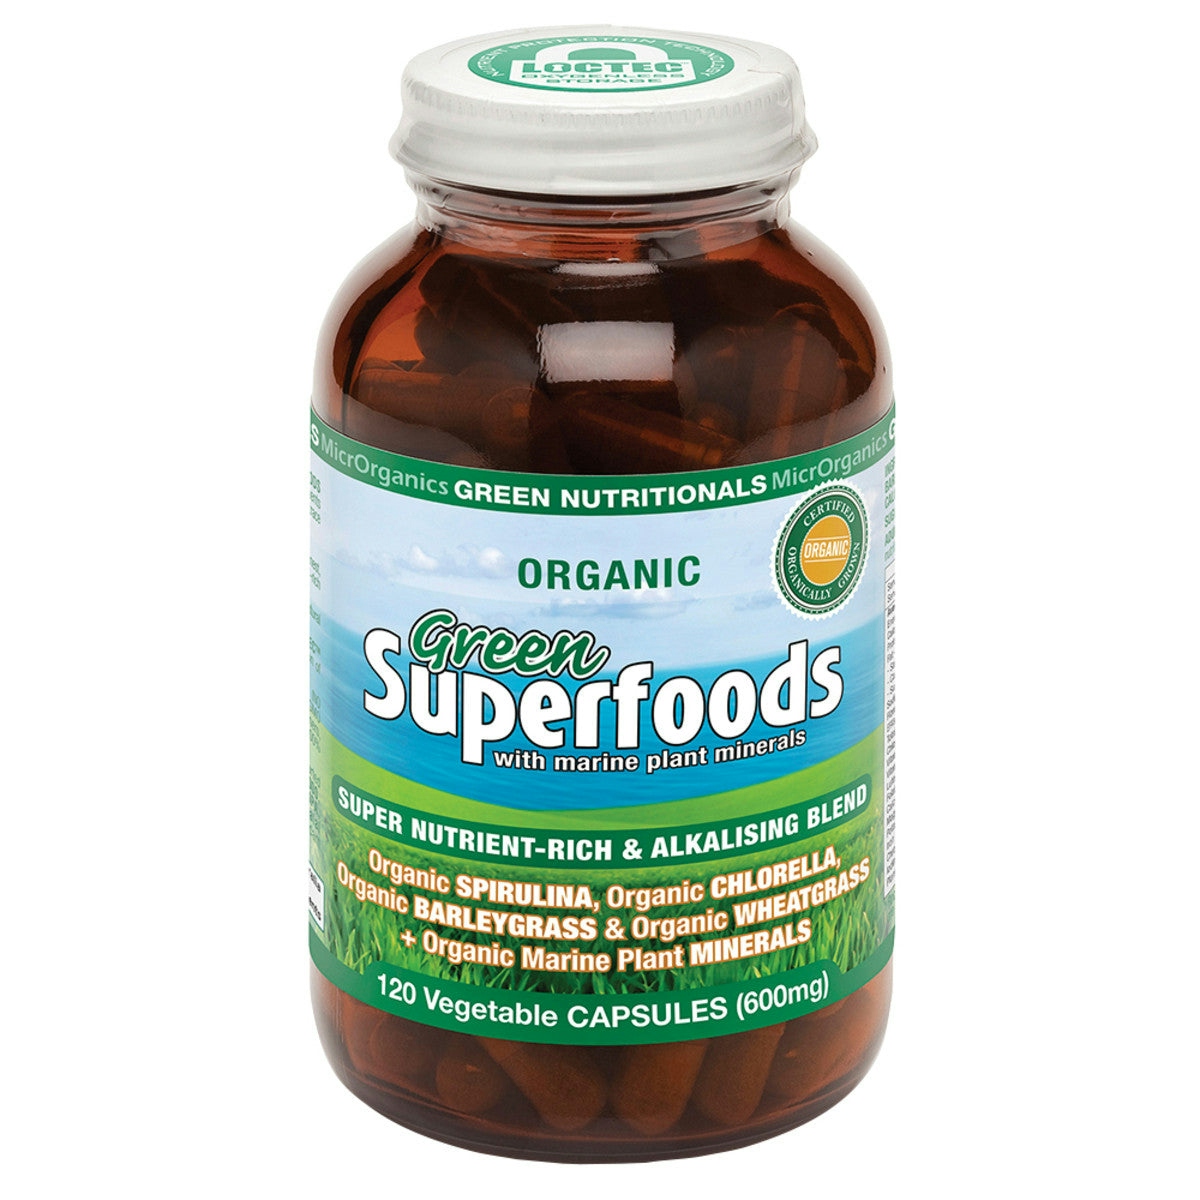 image of MicrOrganics Green Nutritionals Green Superfoods 600mg 120vc on white background